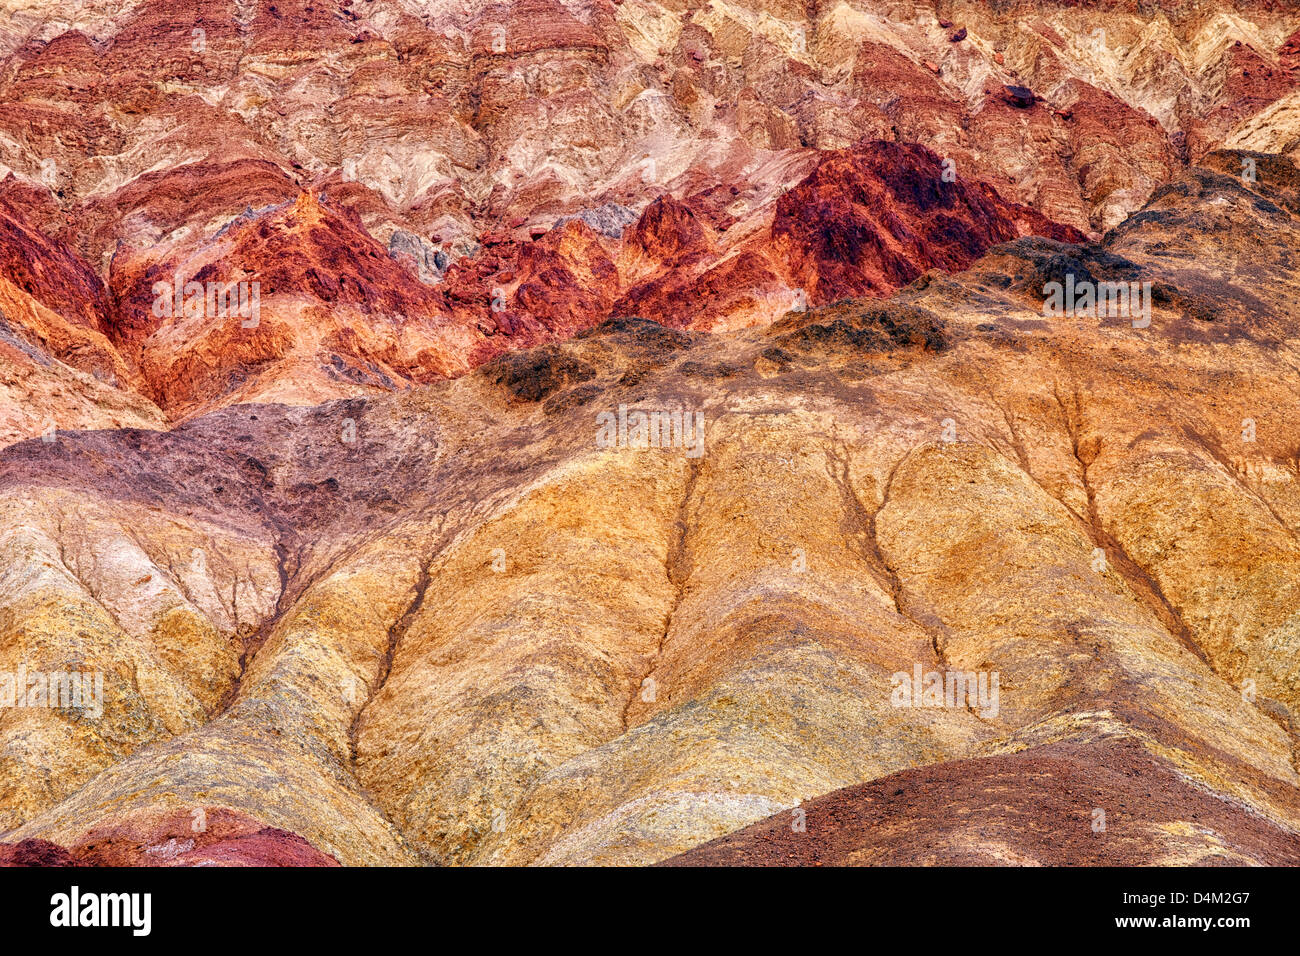 Colorful hills created by the oxidation of many metals along Artist Drive and California's Death Valley National Park. Stock Photo